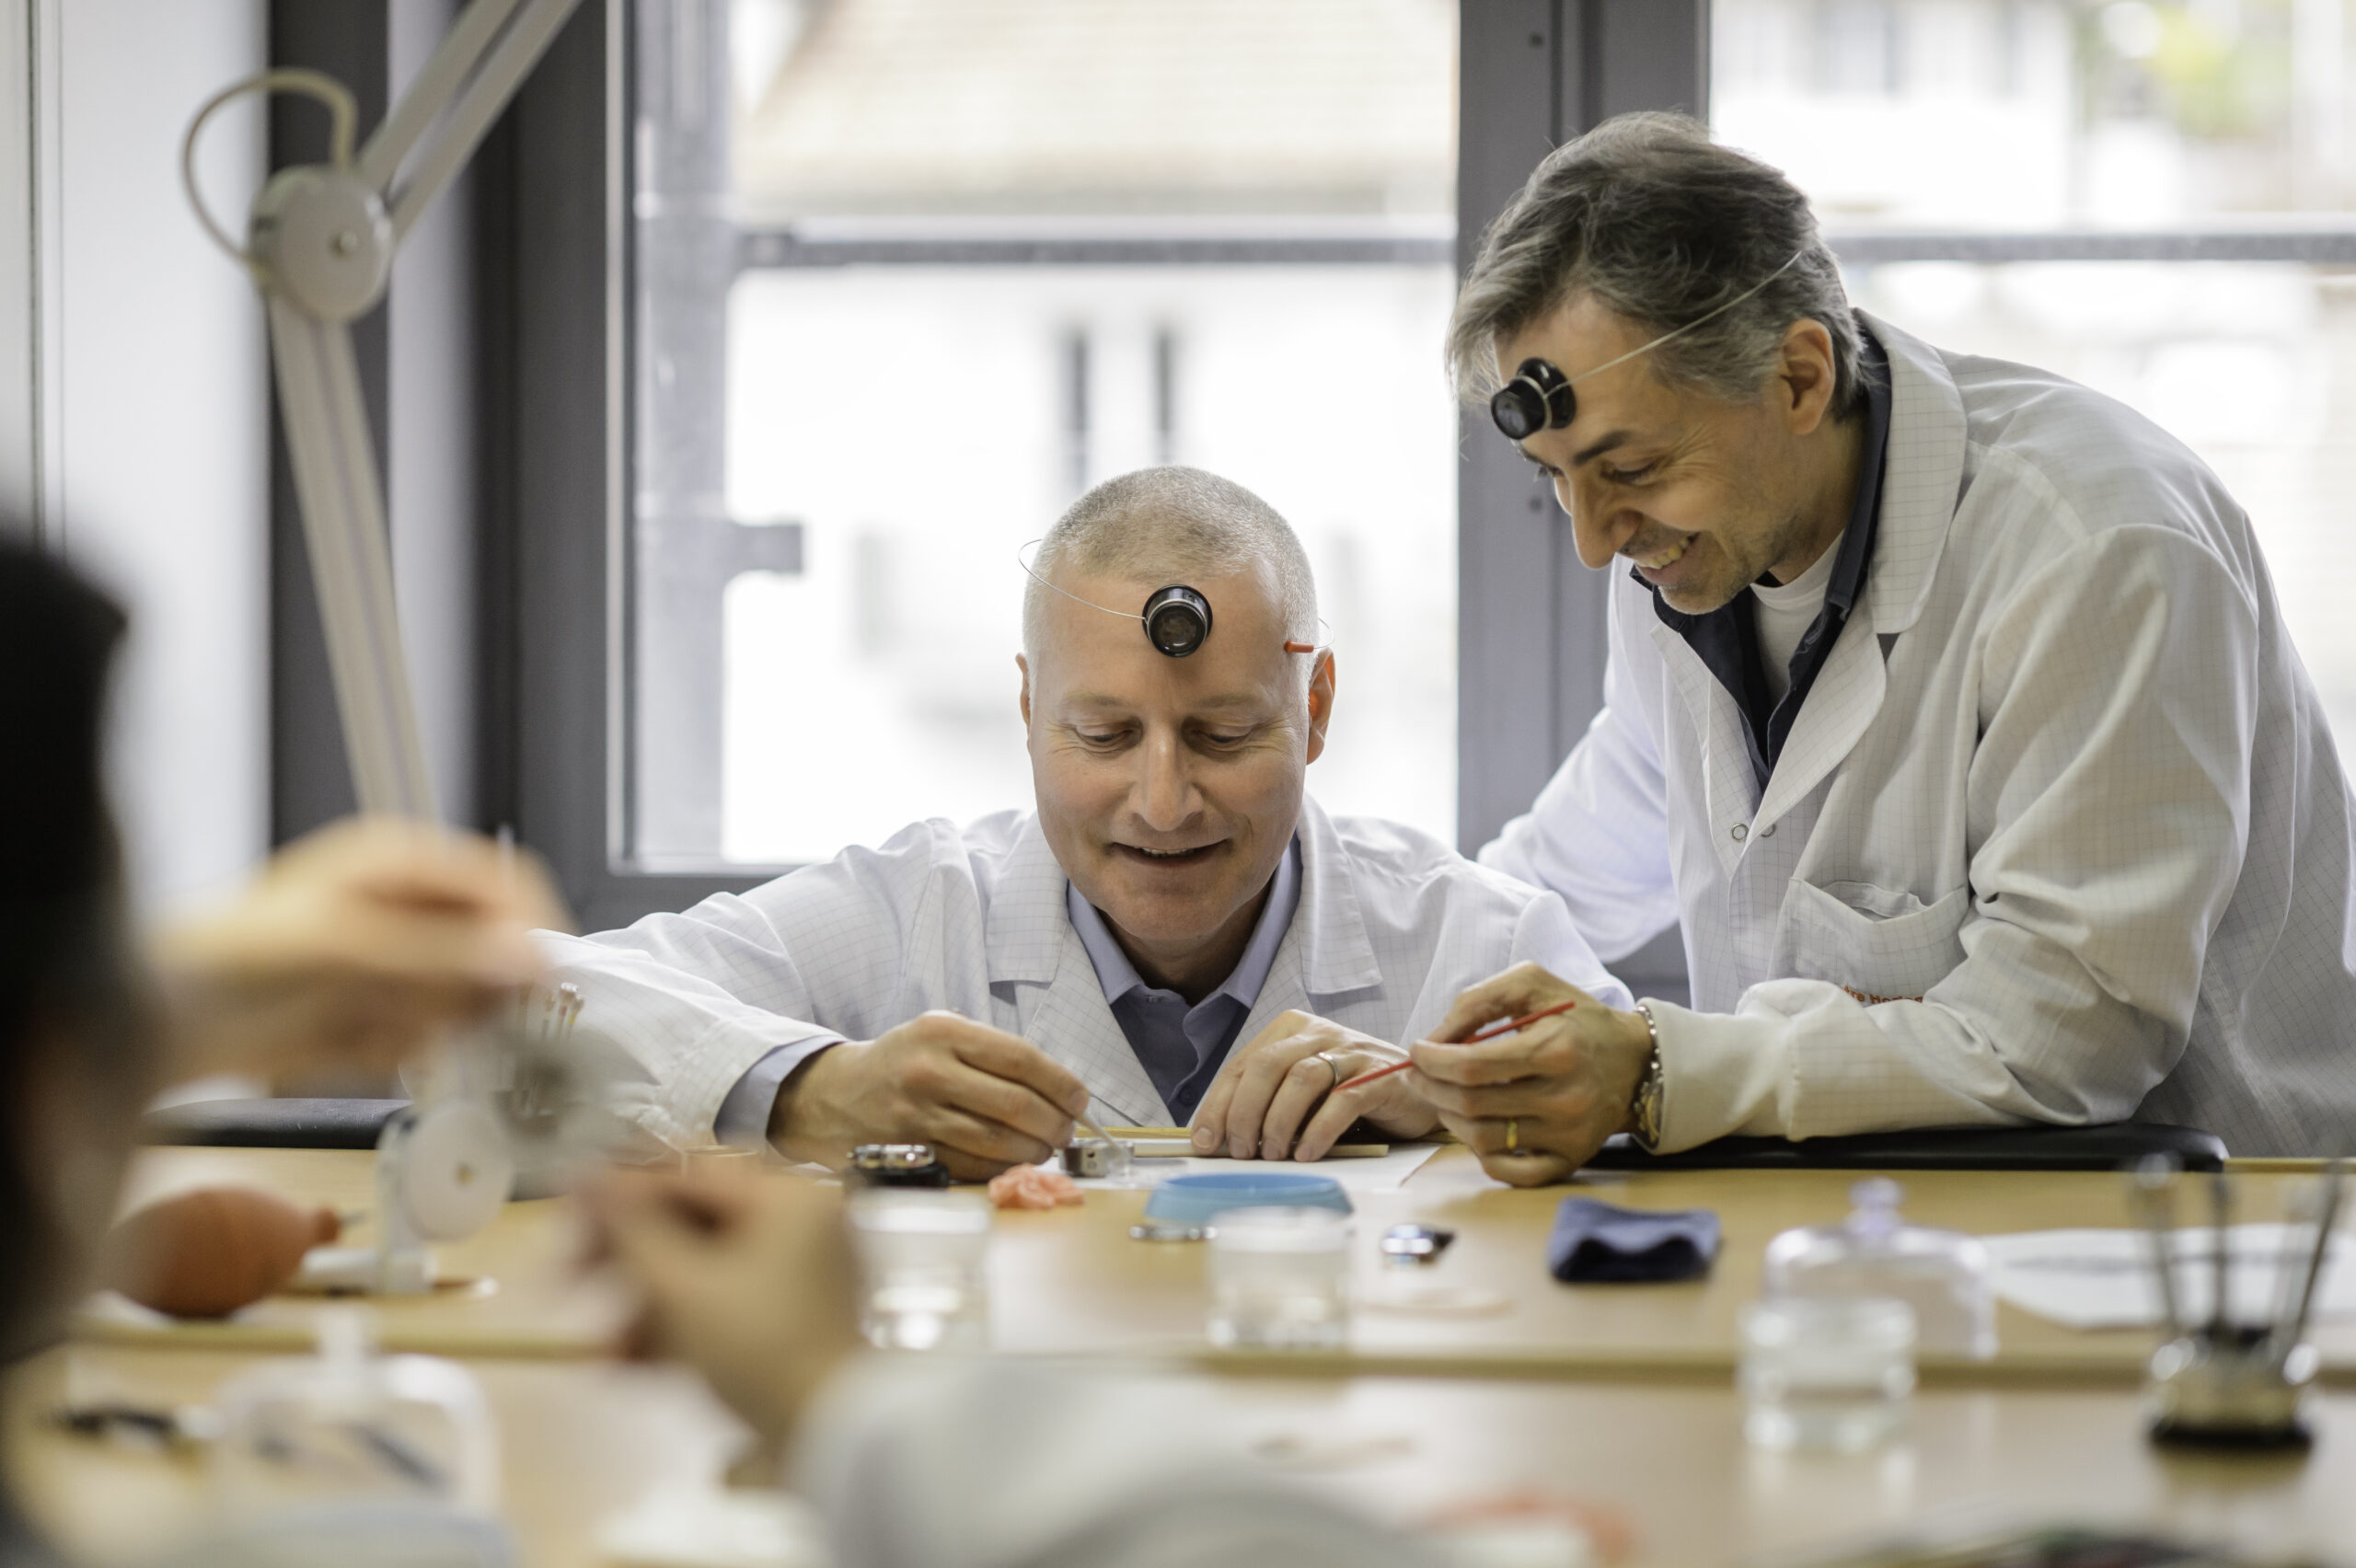 Introduction to watchmaking at the “Centre Horloger”